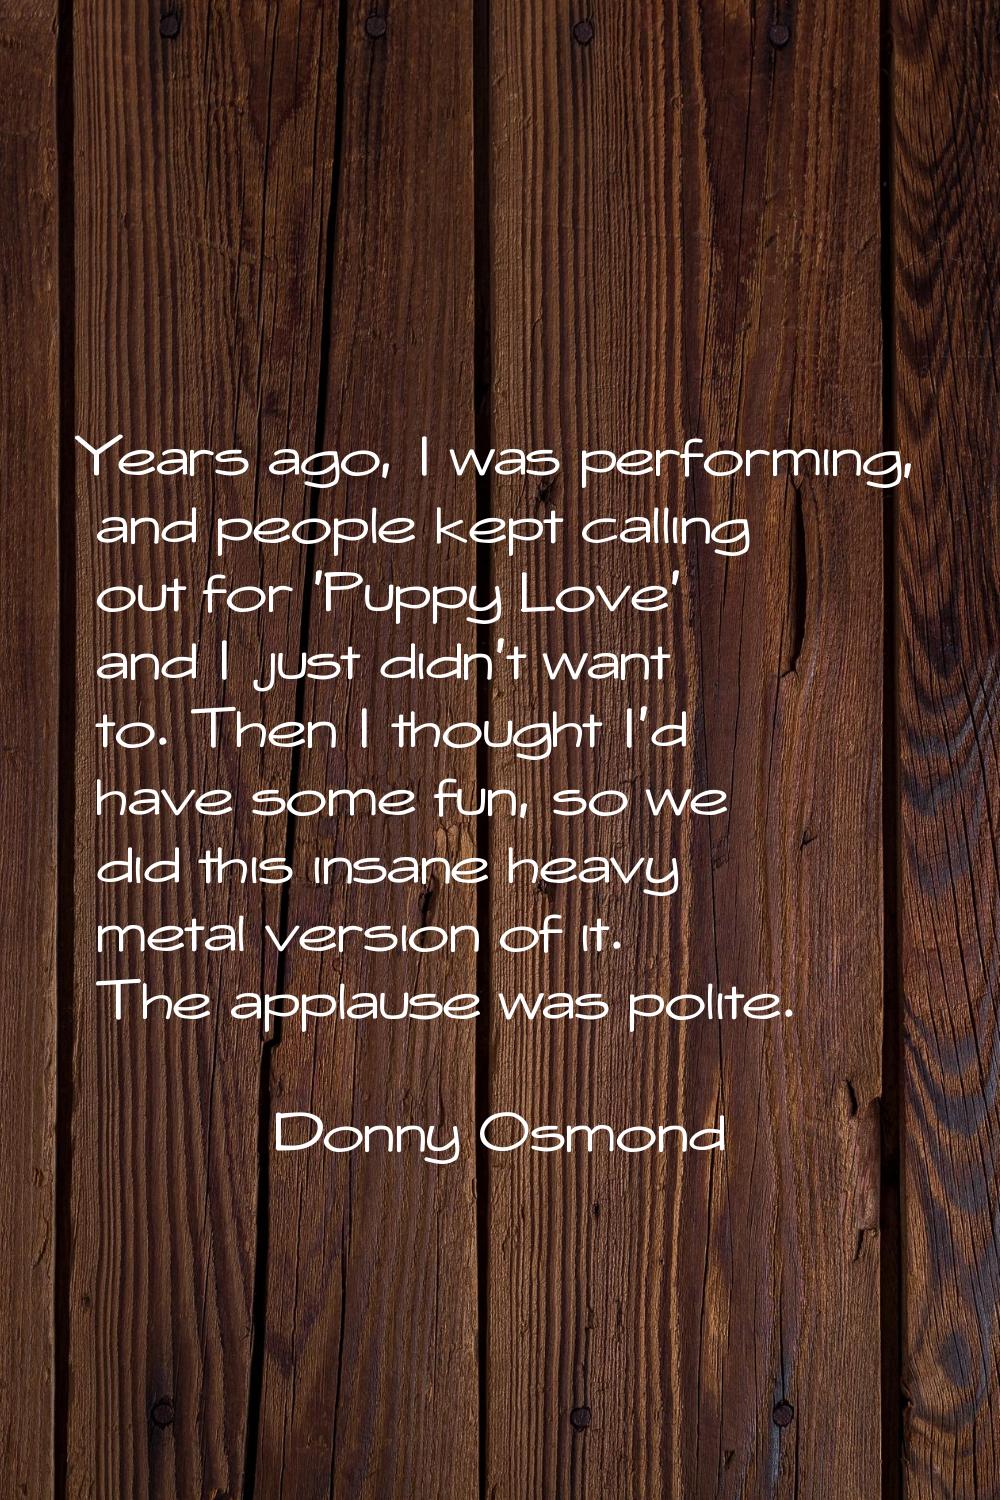 Years ago, I was performing, and people kept calling out for 'Puppy Love' and I just didn't want to